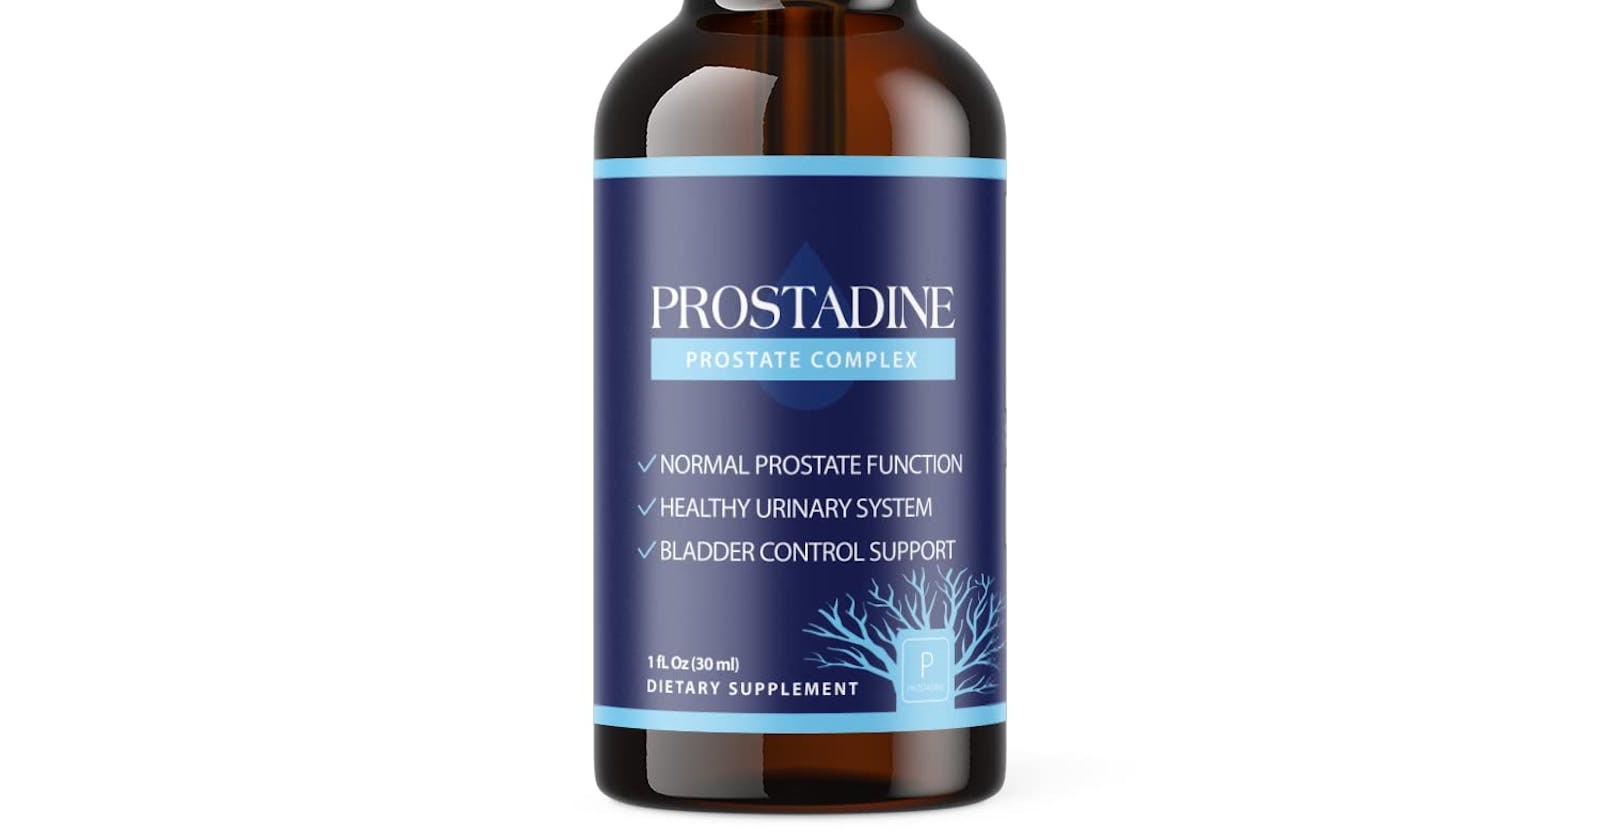 Prostadine: An All-Natural Solution for Prostate Problems